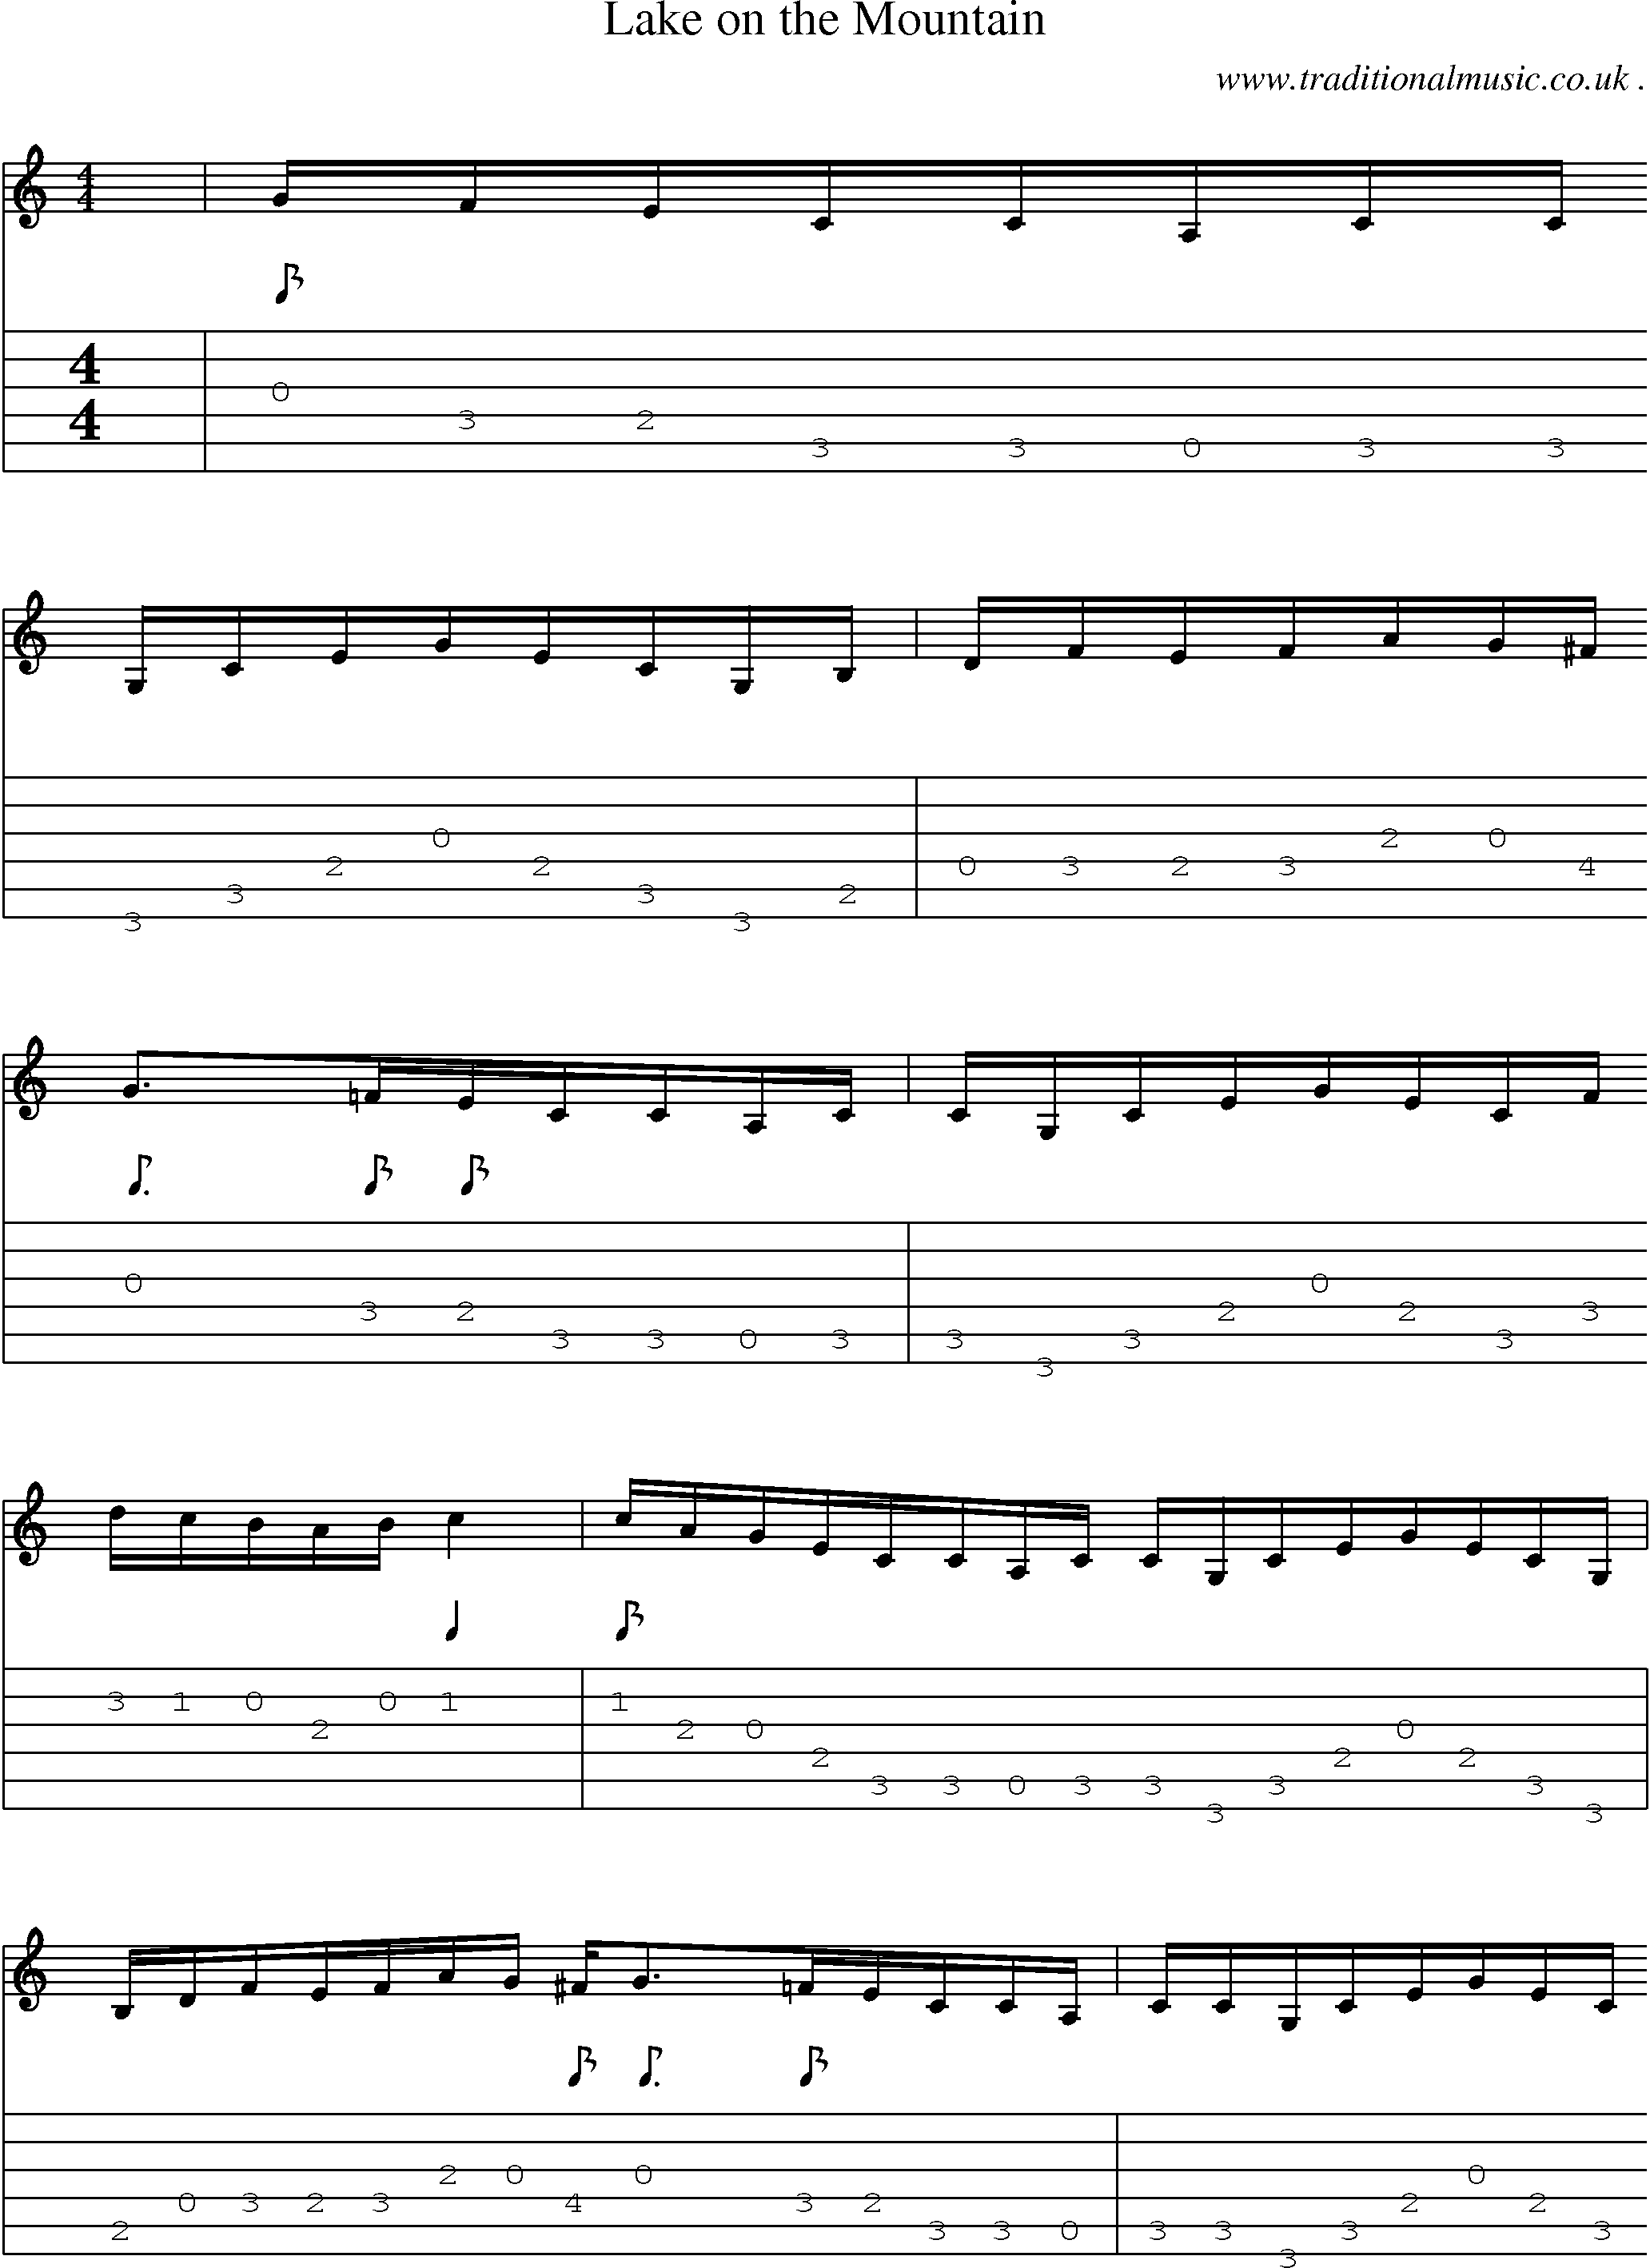 Sheet-music  score, Chords and Guitar Tabs for Lake On The Mountain